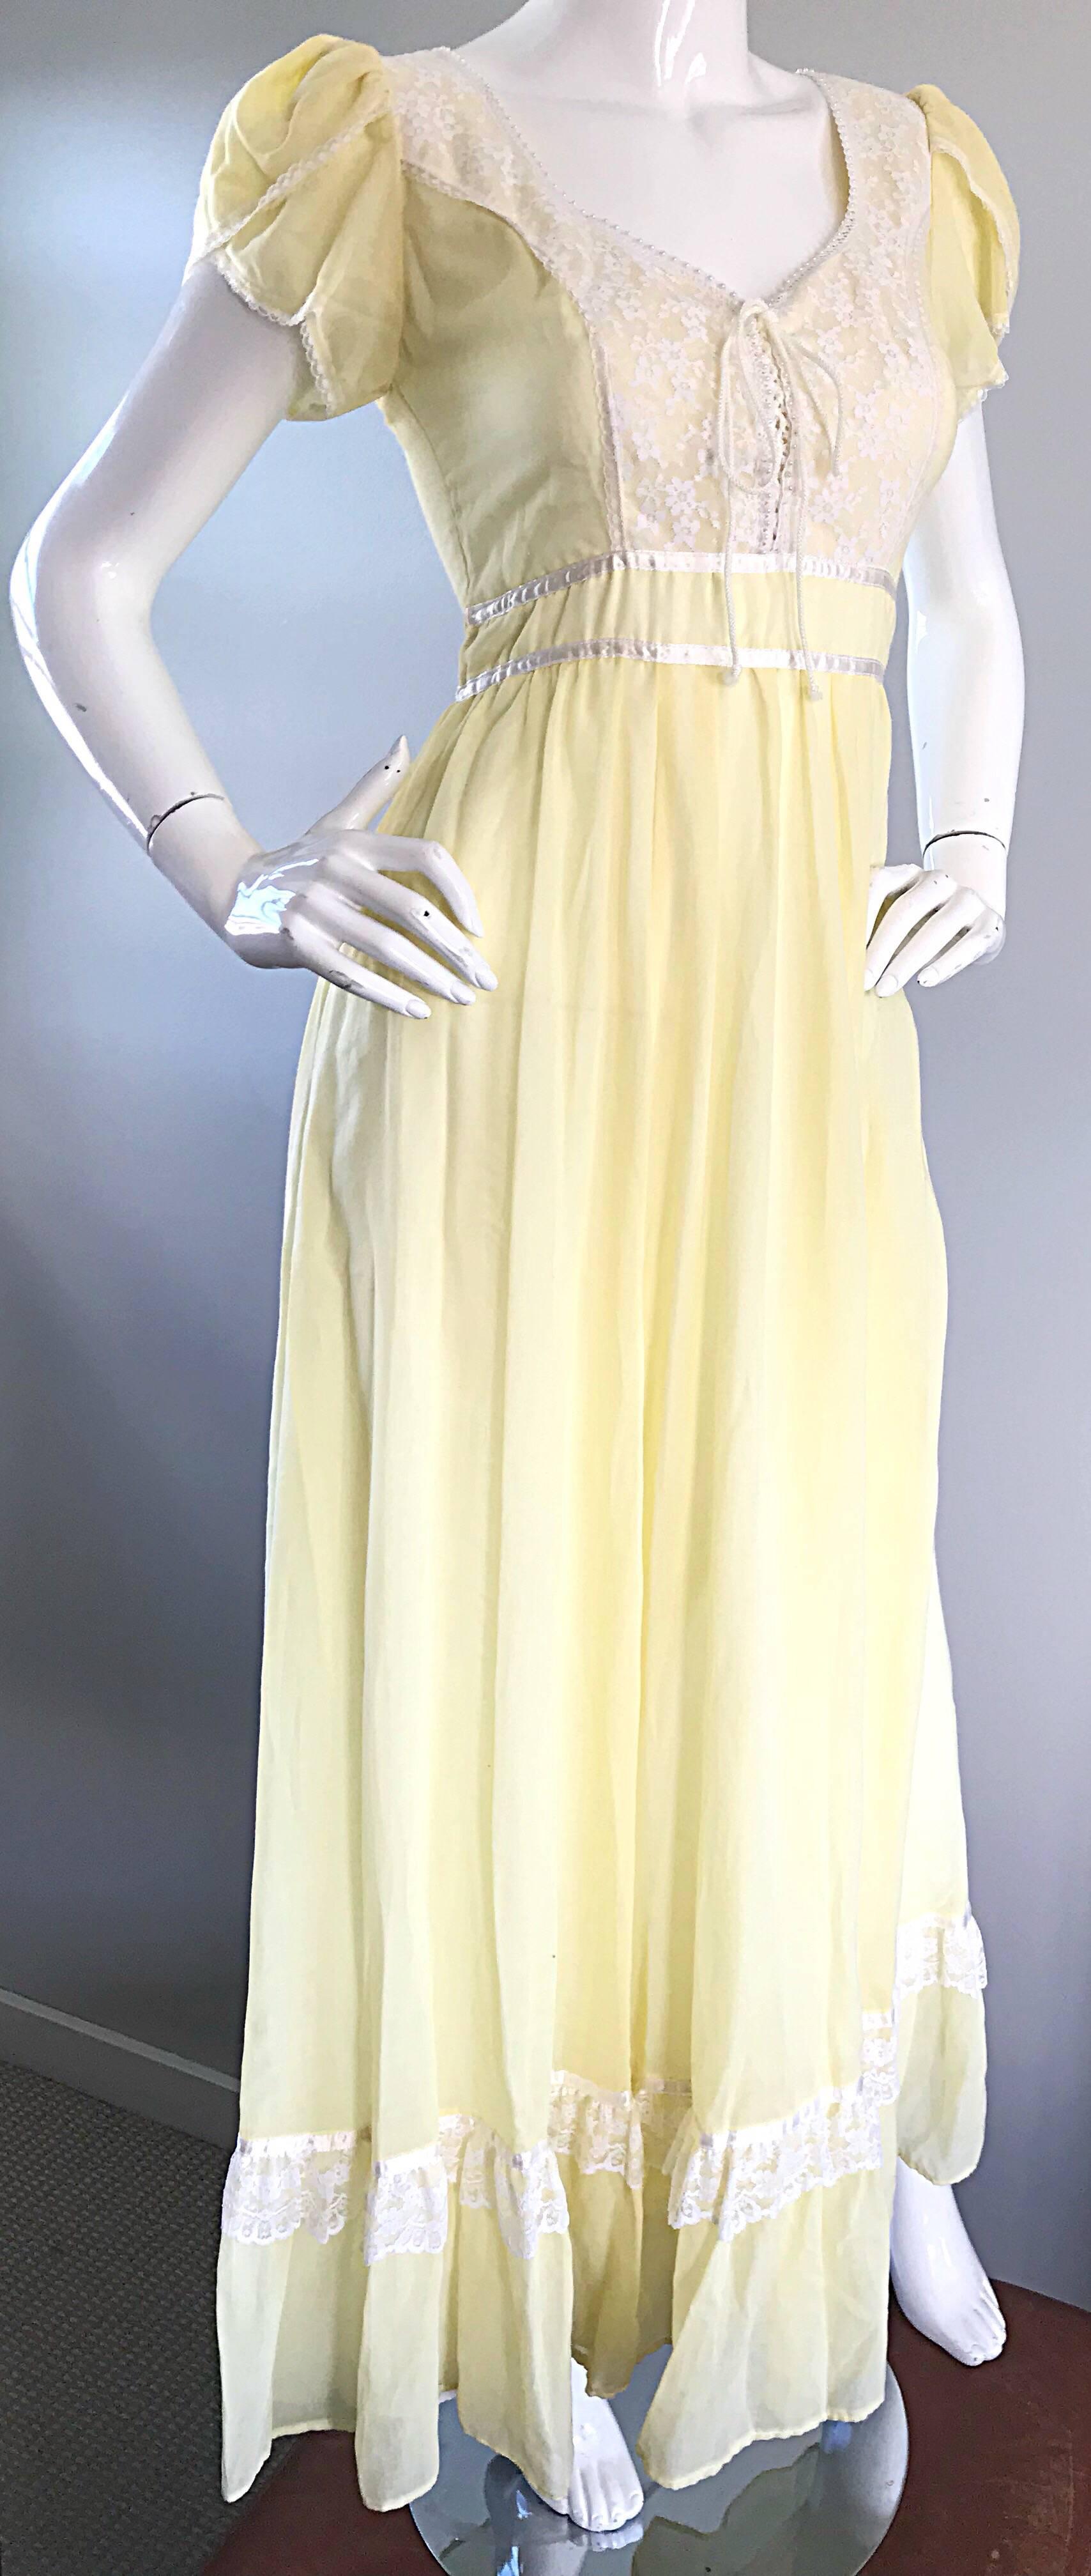 1970s Pale Yellow White Cotton Voile Pearl Encrusted Vintage 70s Boho Maxi Dress 3